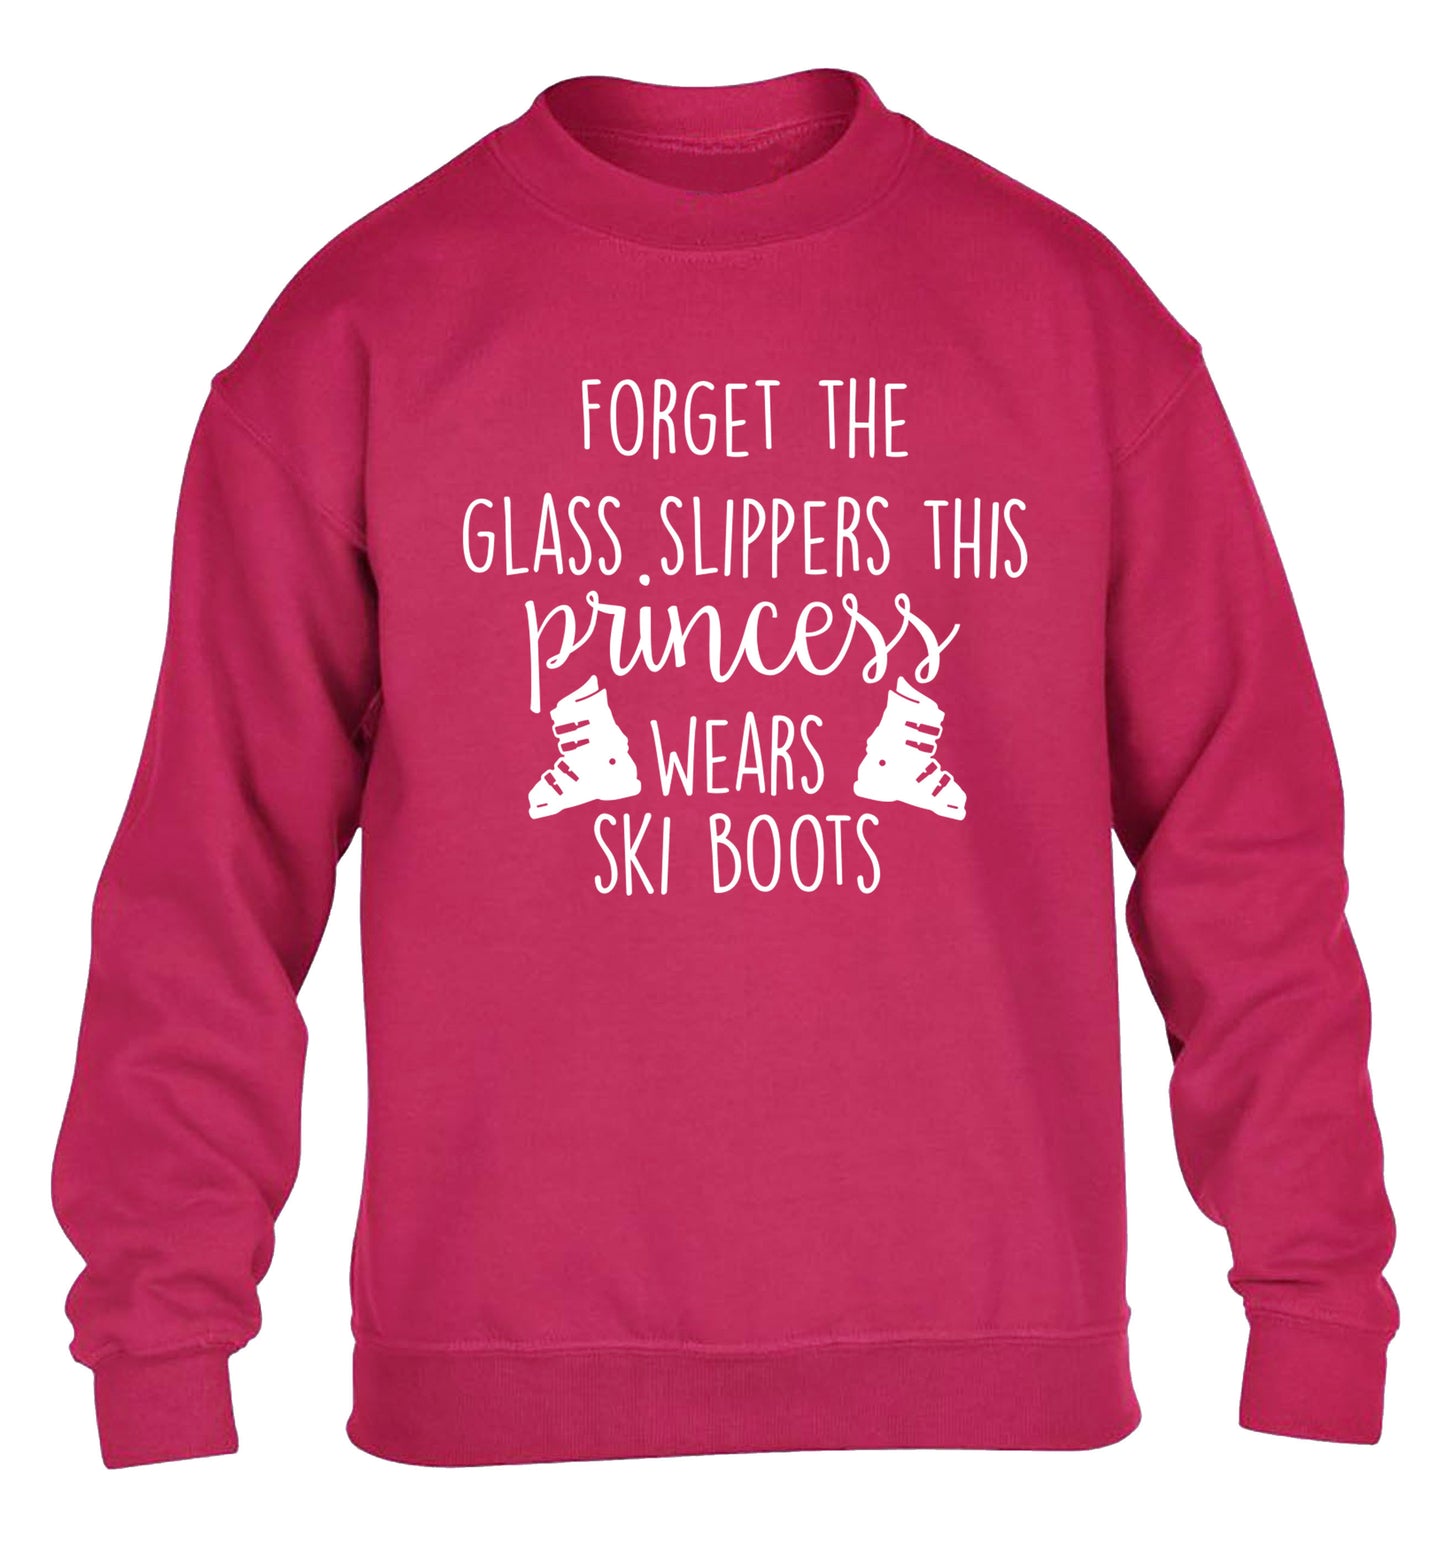 Forget the glass slippers this princess wears ski boots children's pink sweater 12-14 Years